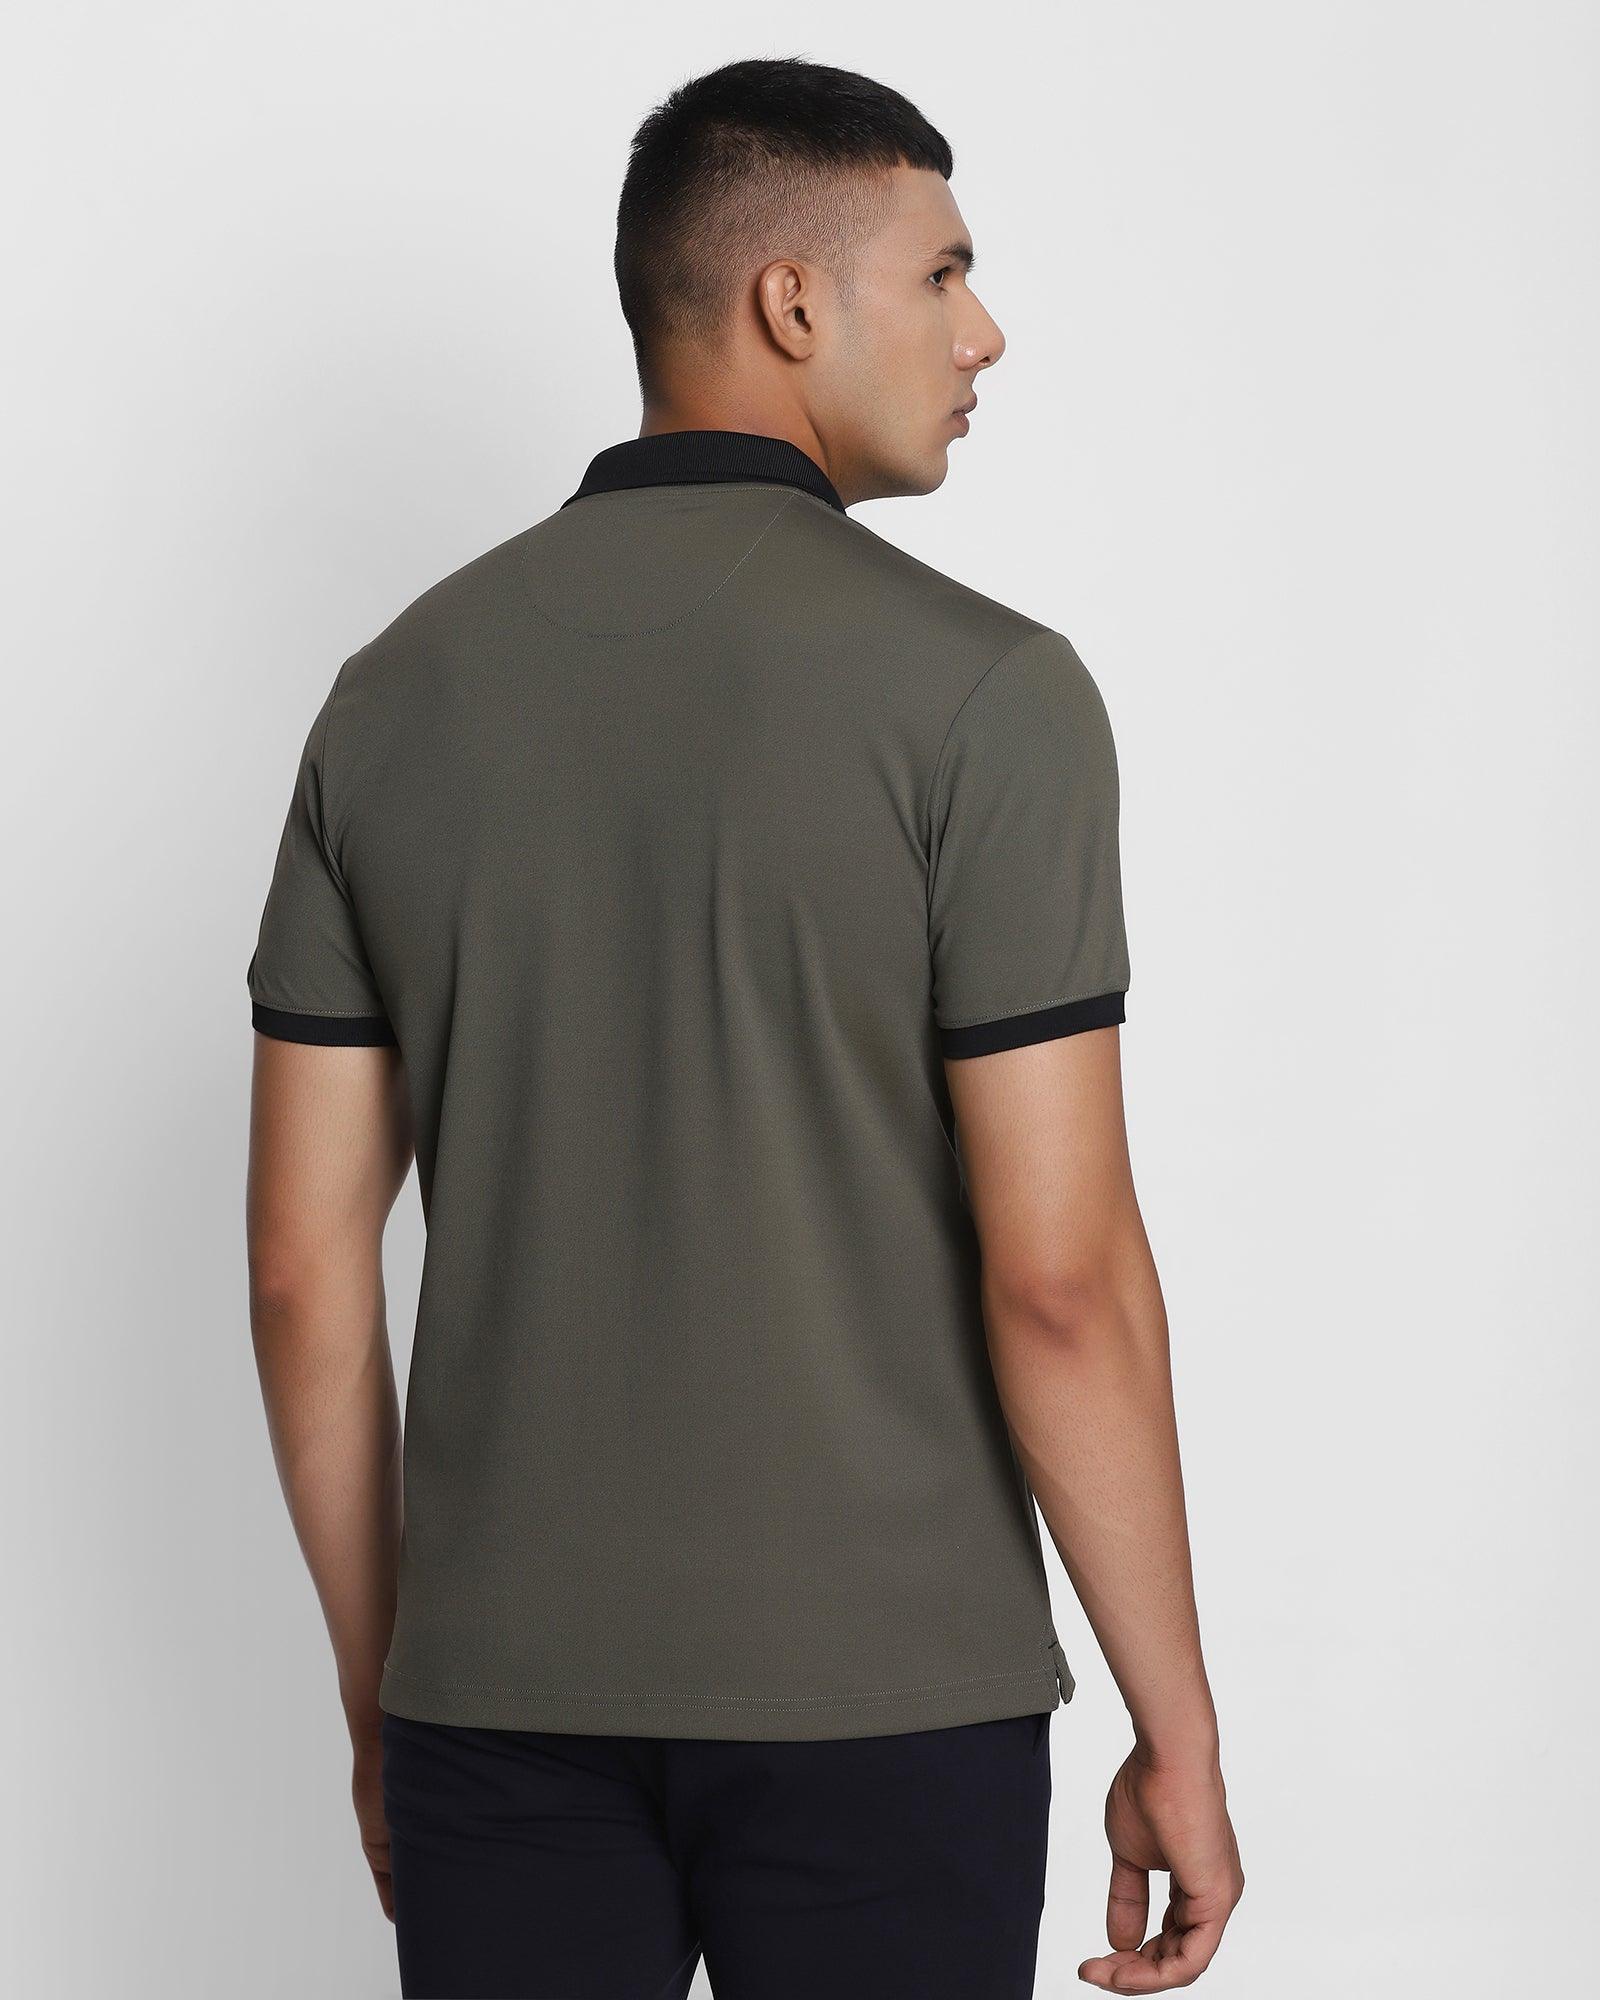 TechPro Polo Olive Solid T Shirt - Elite